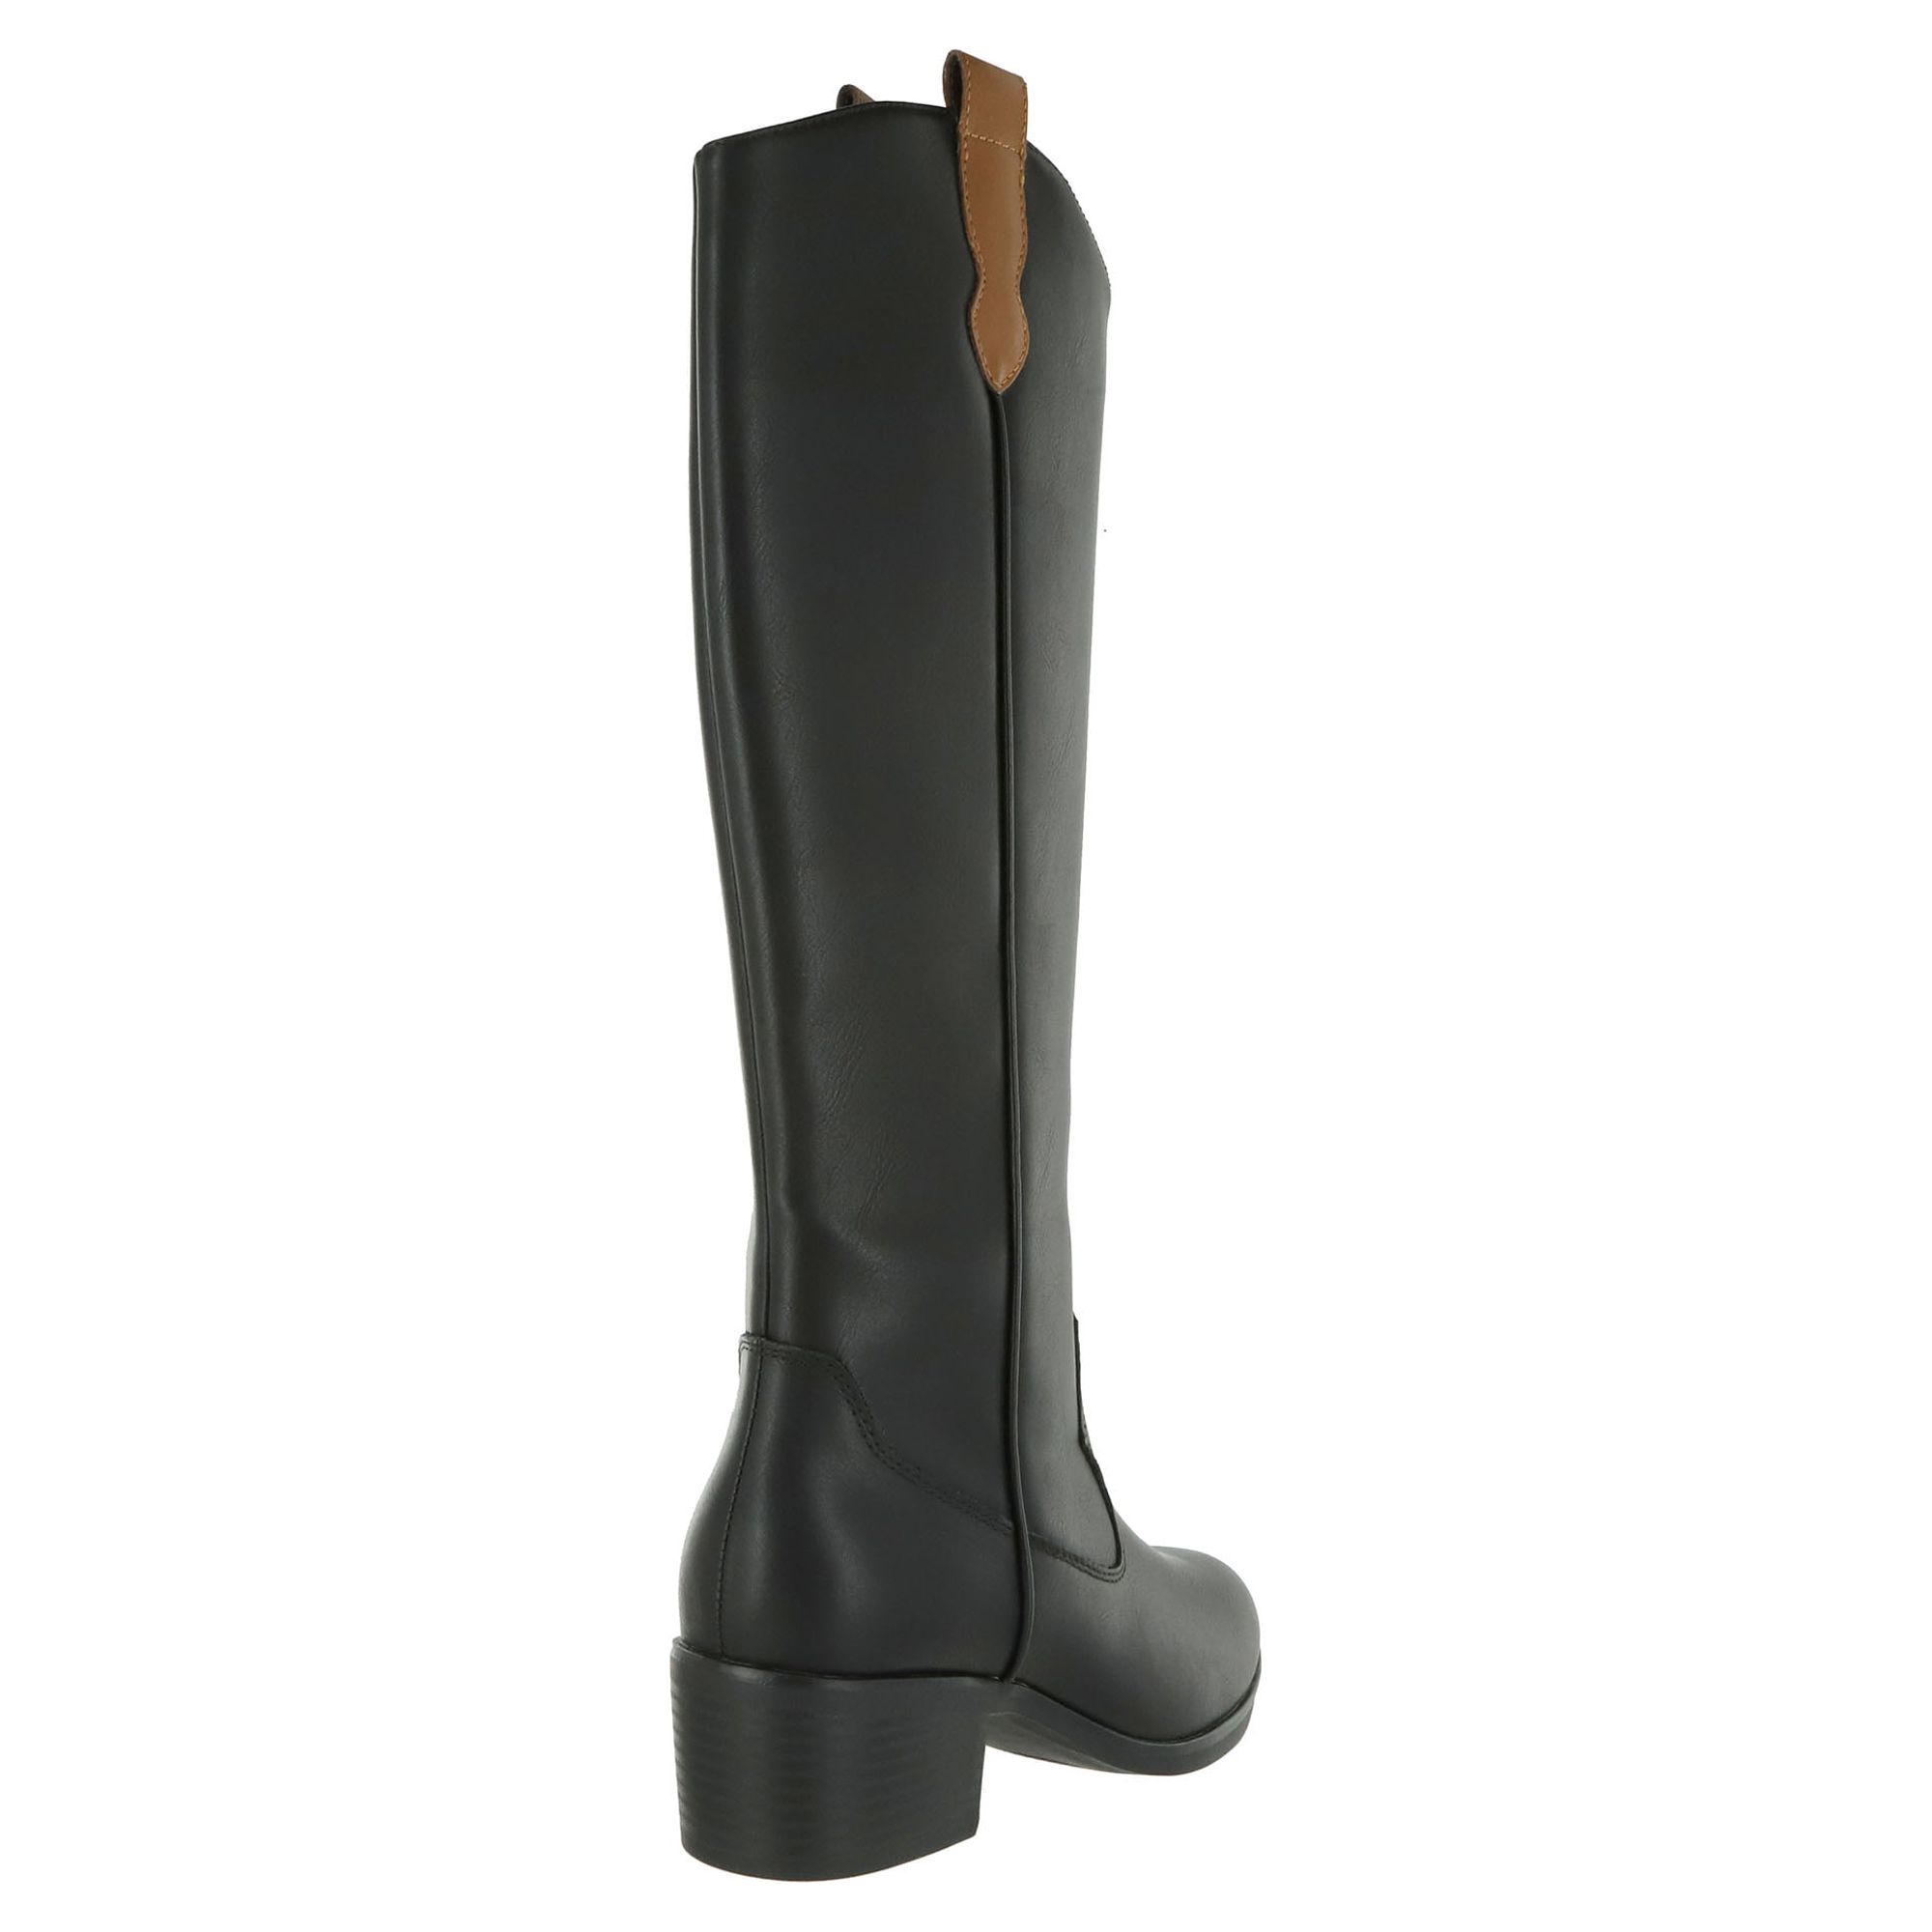 The Pioneer Woman Western Riding Boots, Women's, Wides Available - image 2 of 6